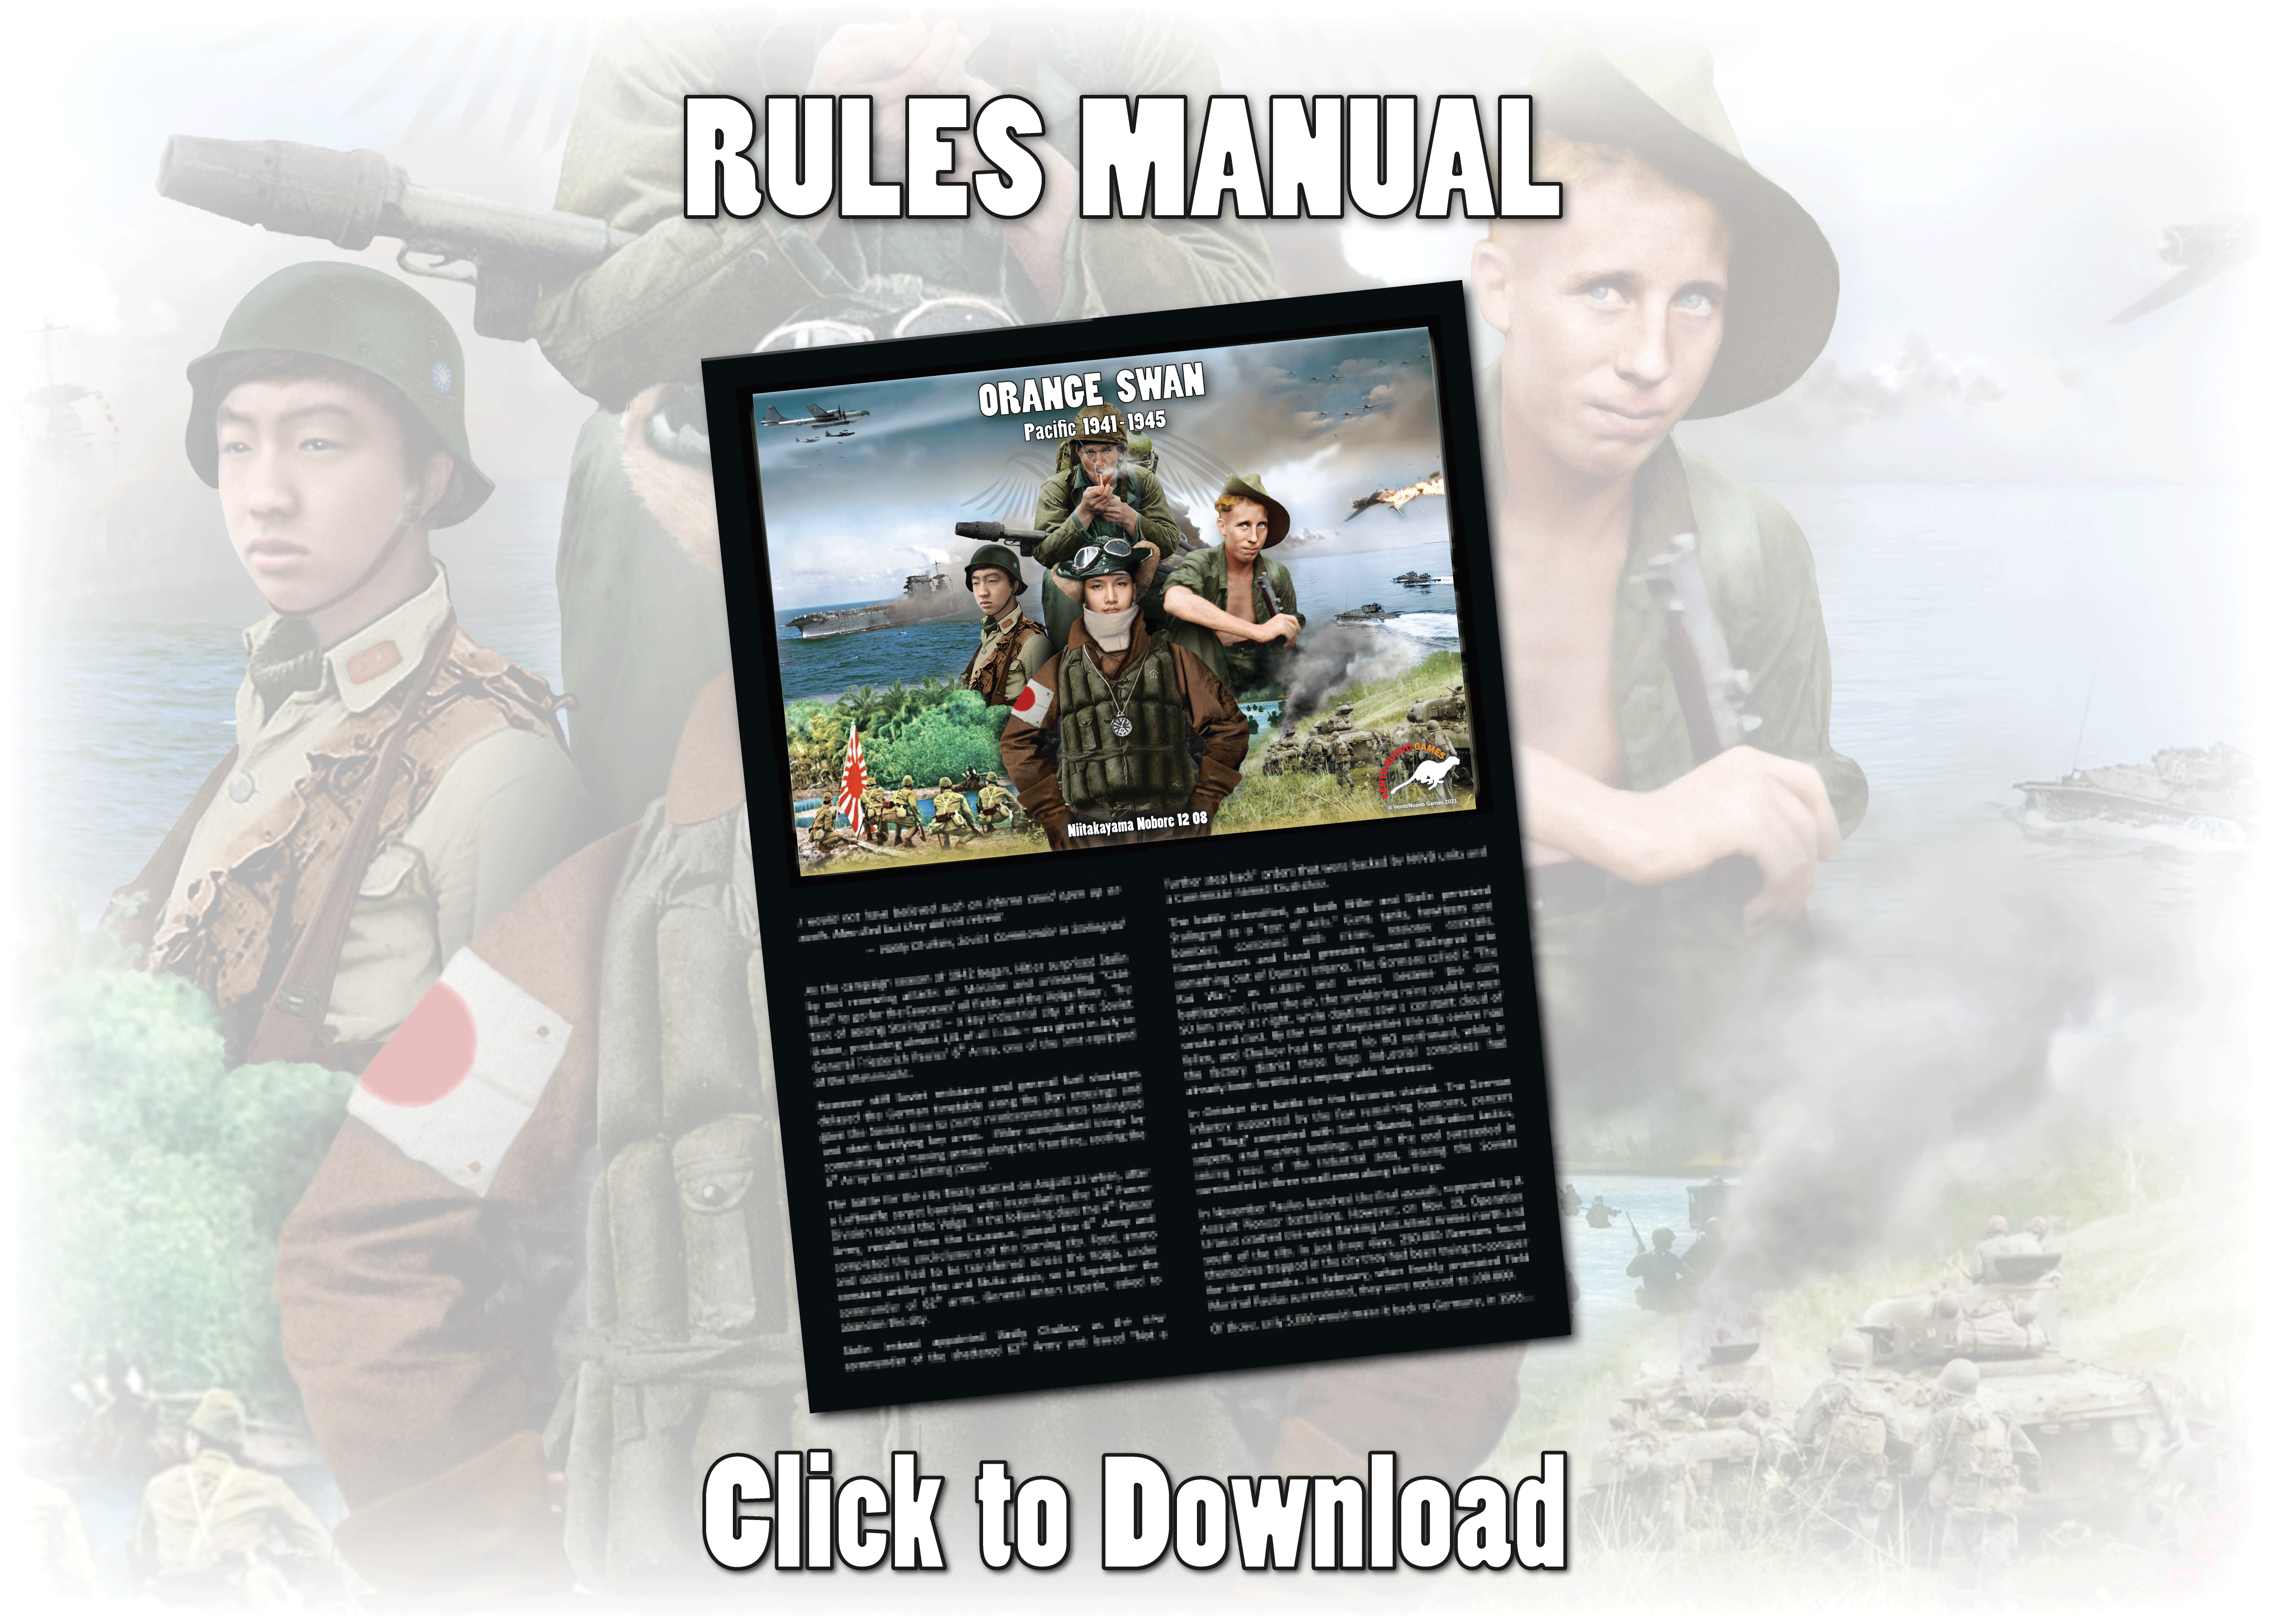 Download the Rules Manual